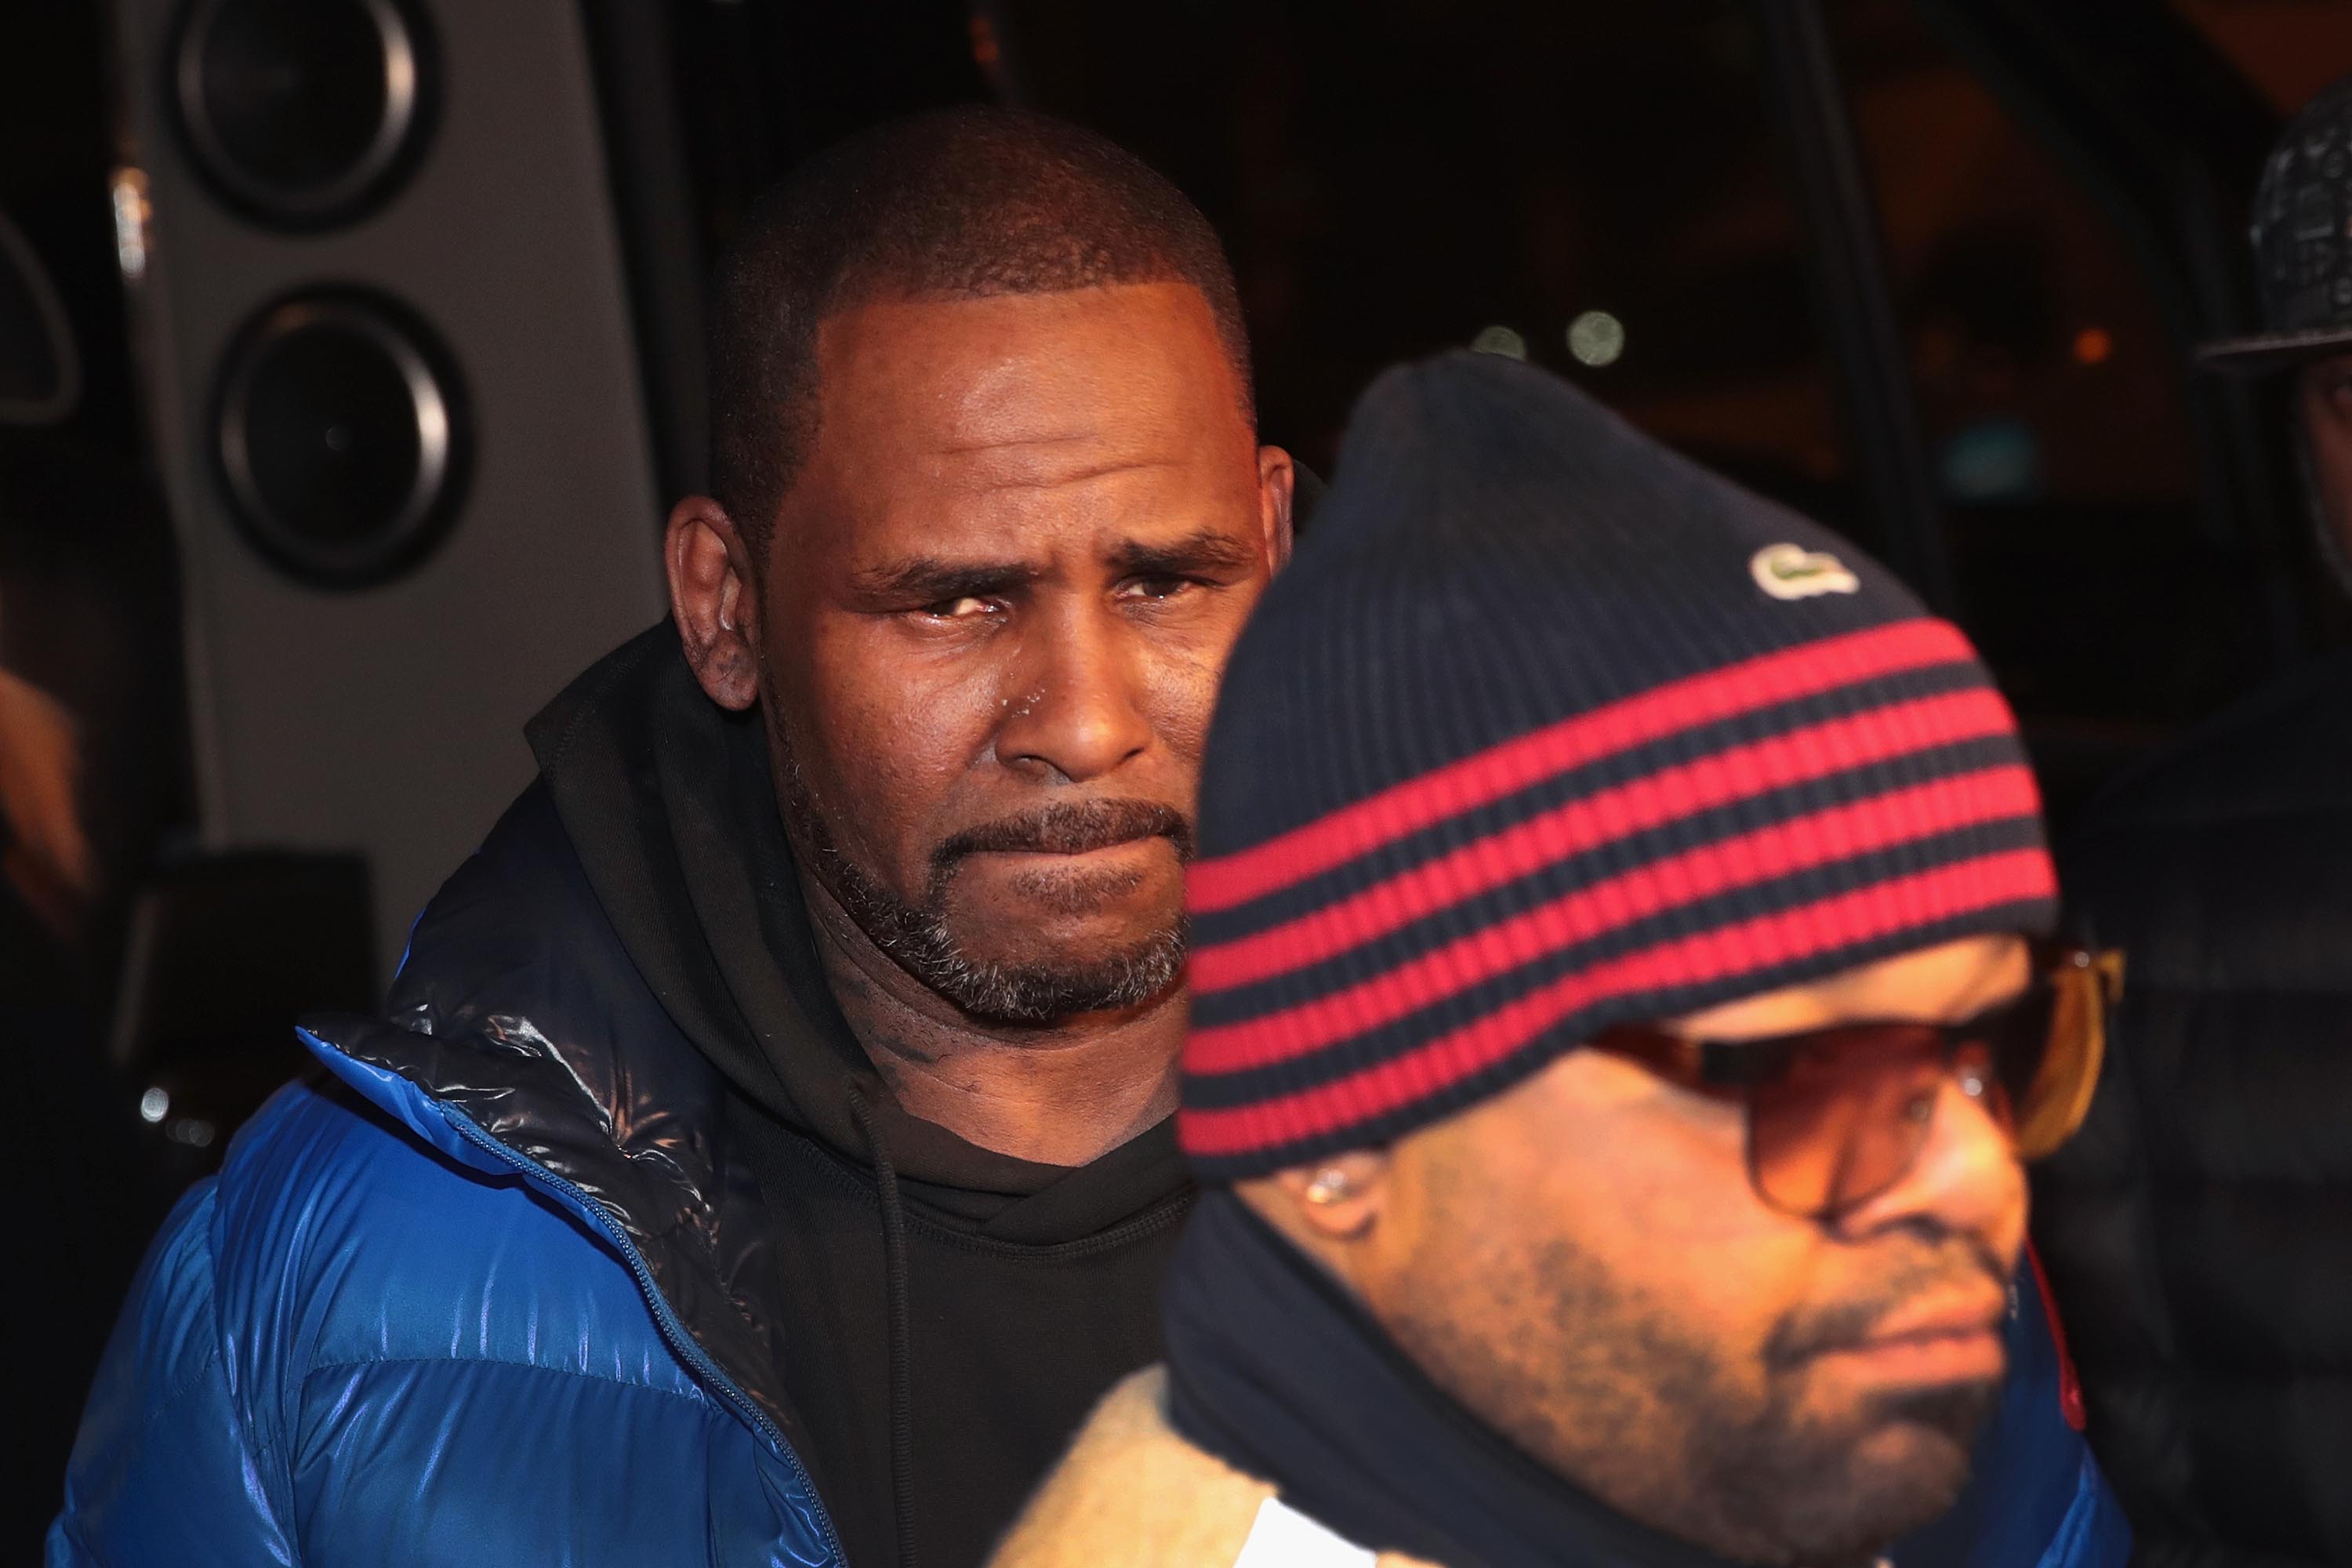 Singer R Kelly due in court Saturday on sexual assault charges